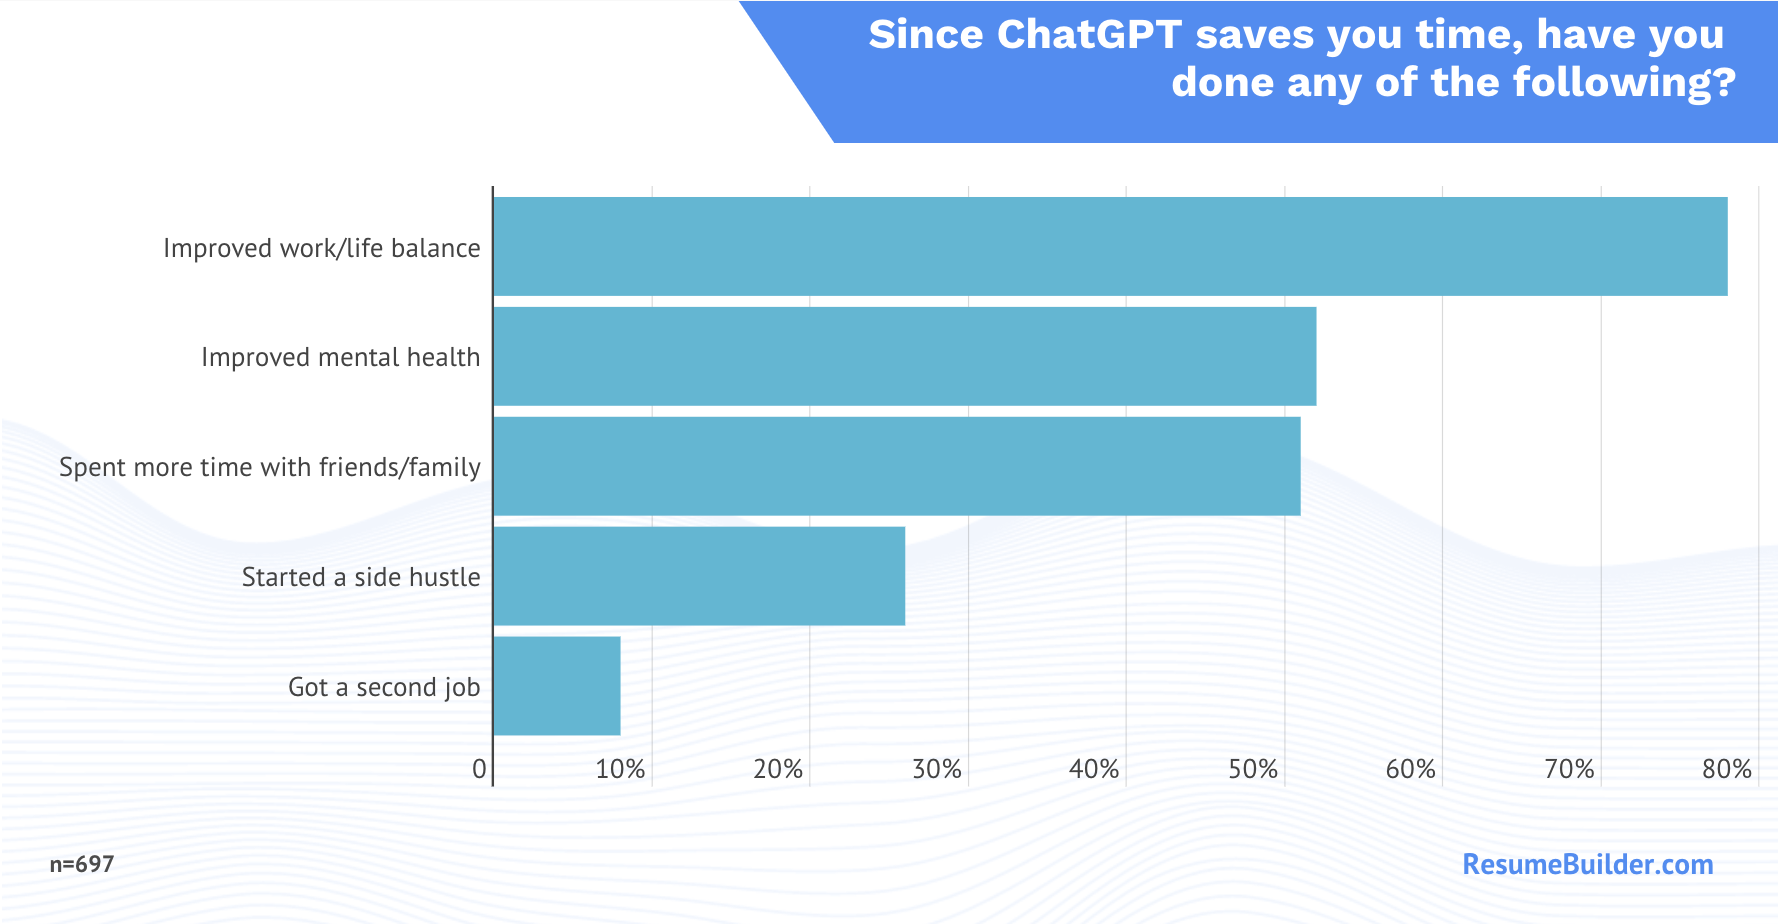 Accounting technology trend: Since using ChatGPT, 26% of workers say they’ve saved so much time that they now have the time to start a side hustle.